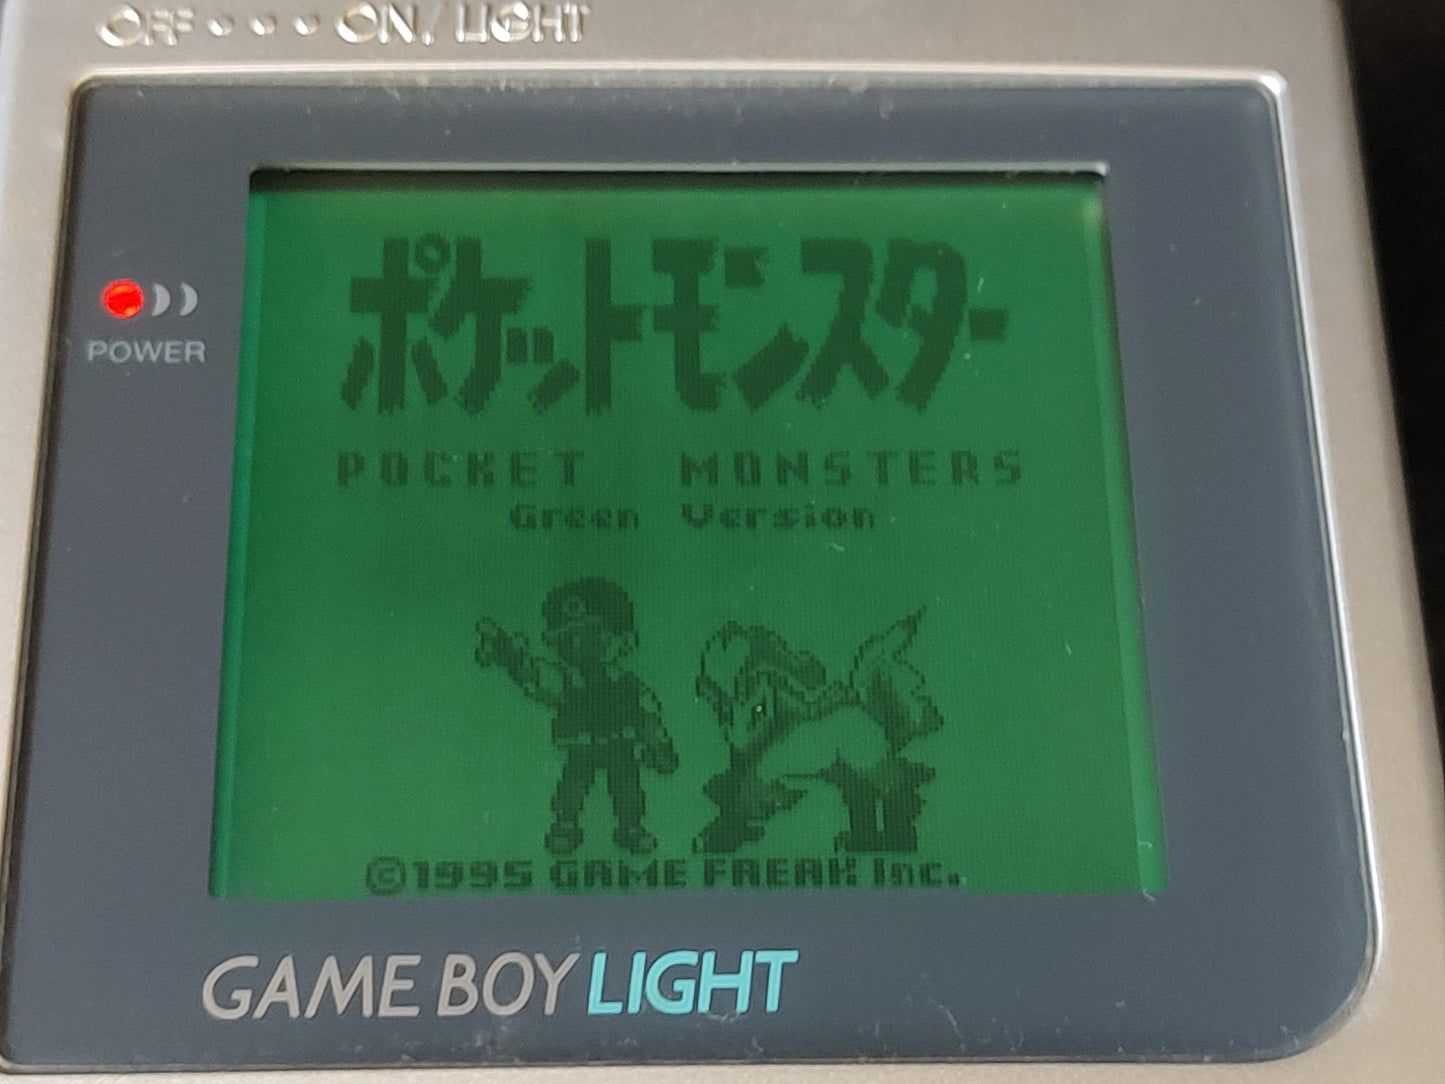 Nintendo Game boy Light Silver color console MGB-101, Manual, Boxed set-f1018-